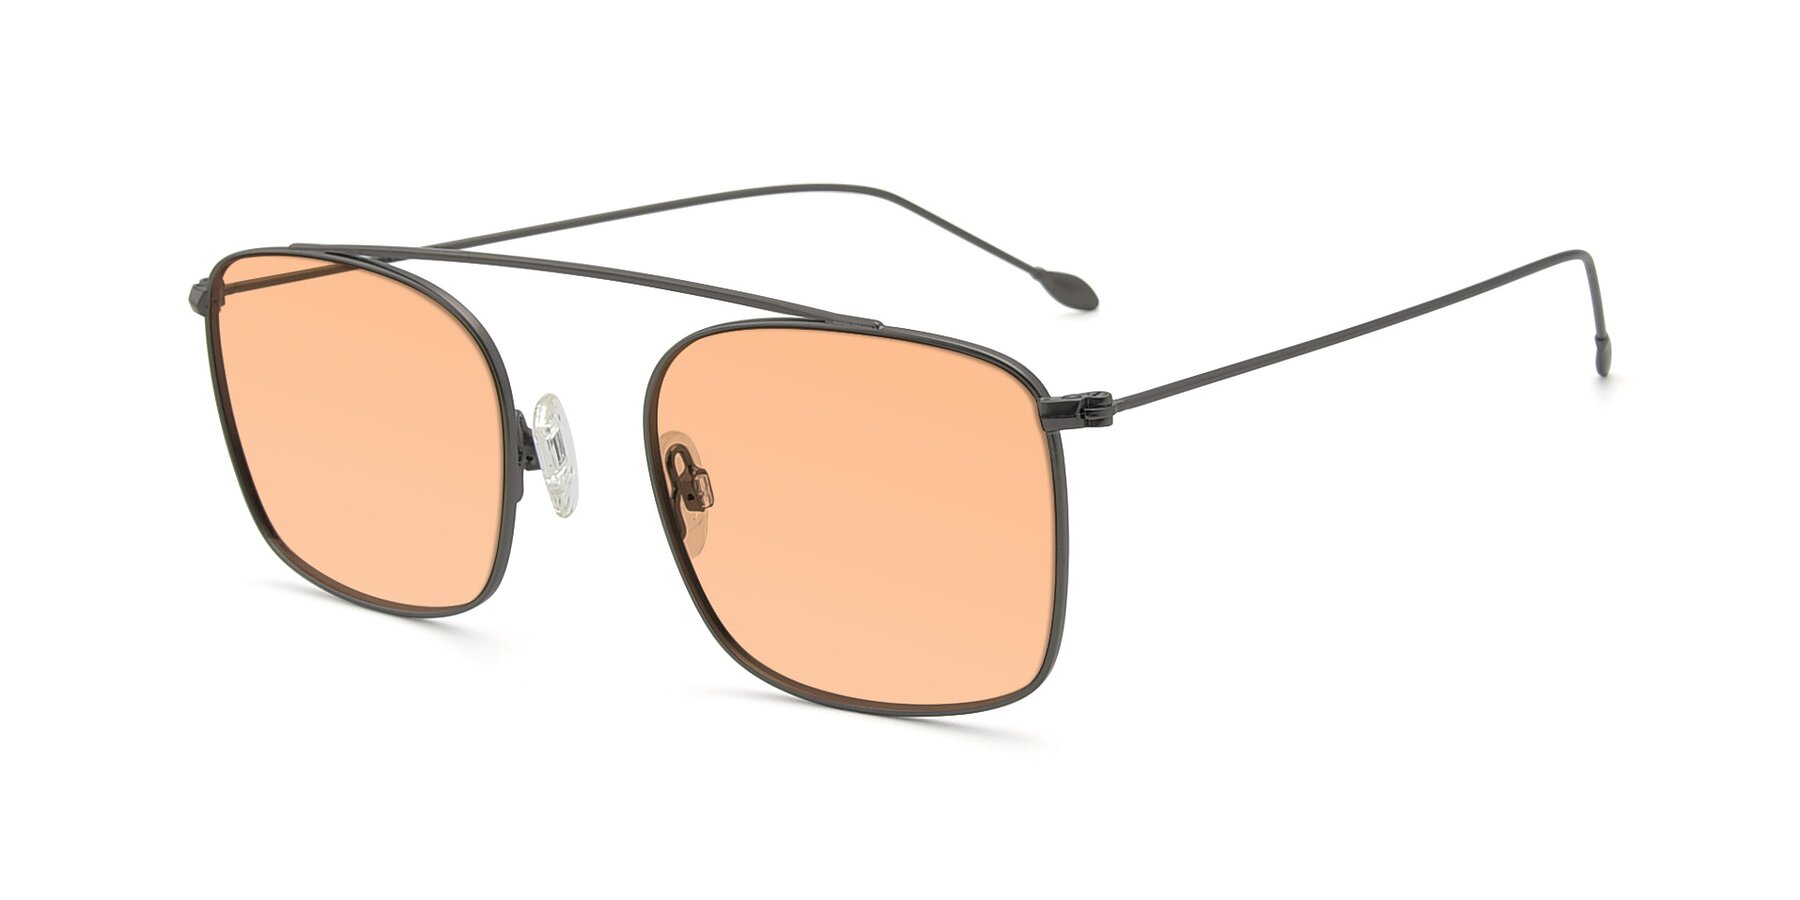 Angle of The Librarian in Gunmetal with Light Orange Tinted Lenses